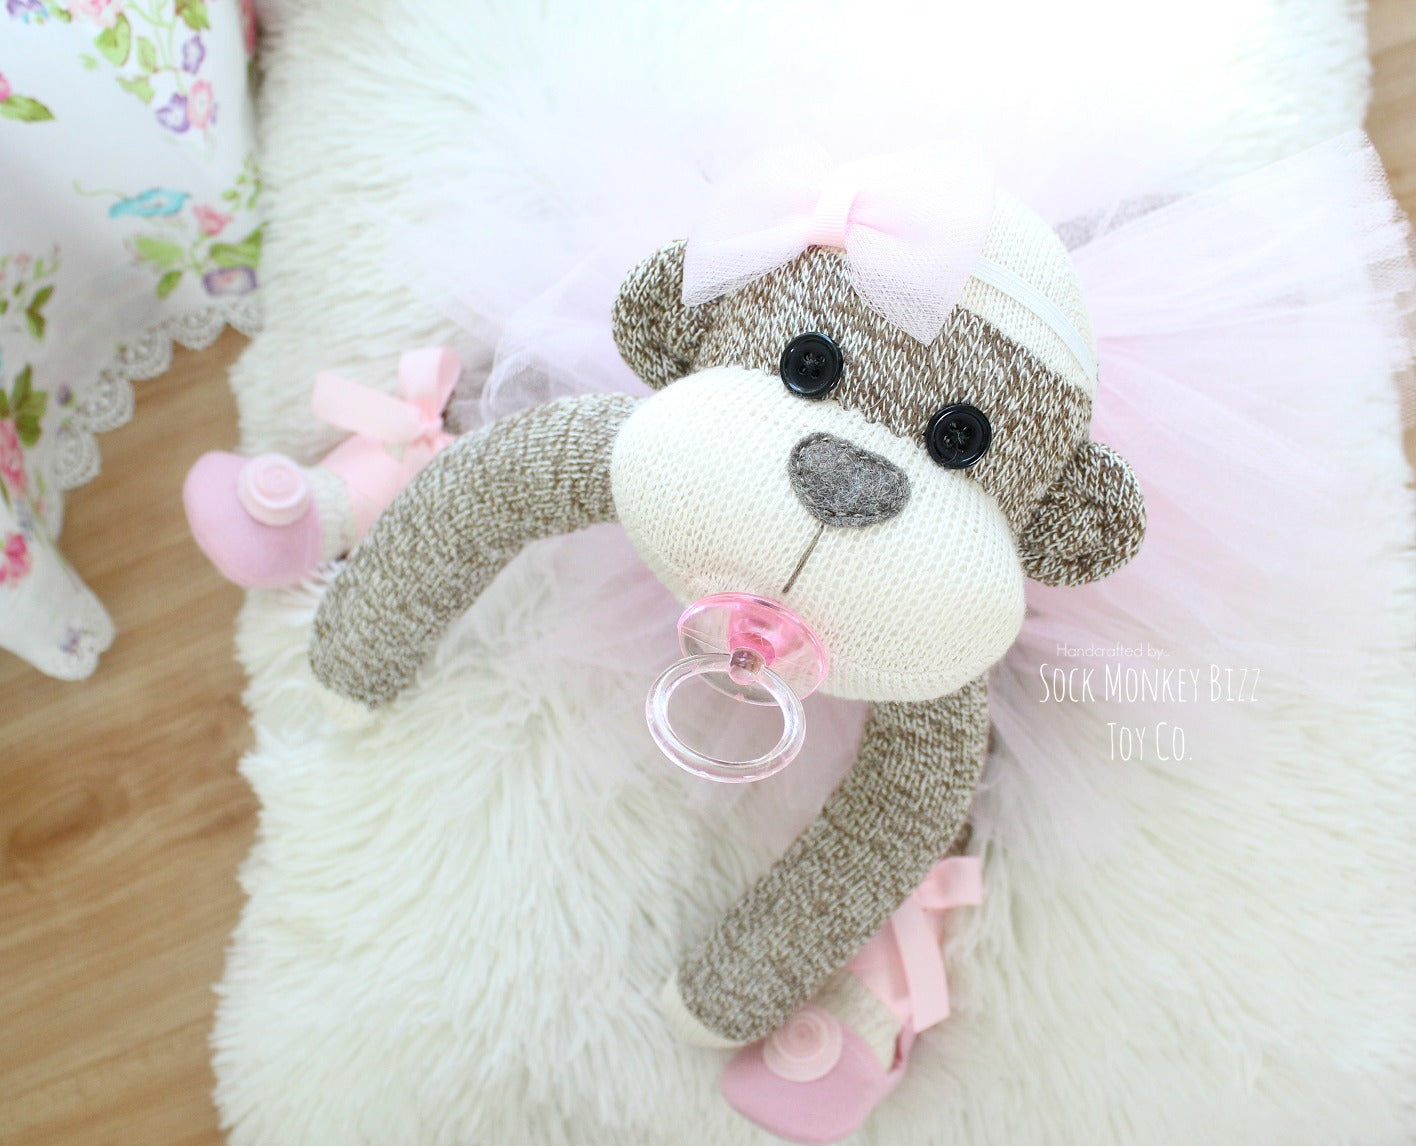 Baby Doll with Pacifier, Handcrafted Ballerina Sock Monkey